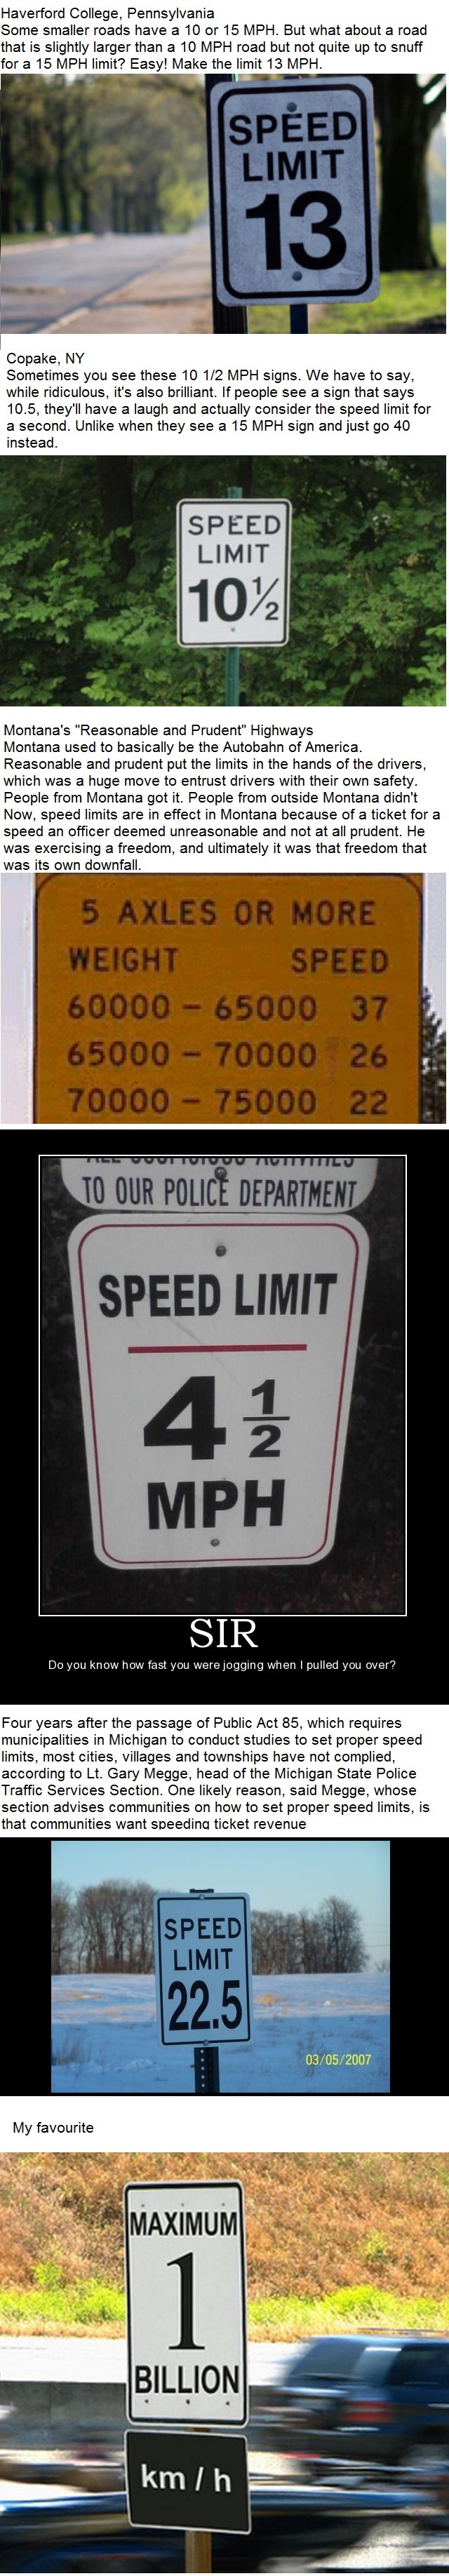 Ridiculous speed limits